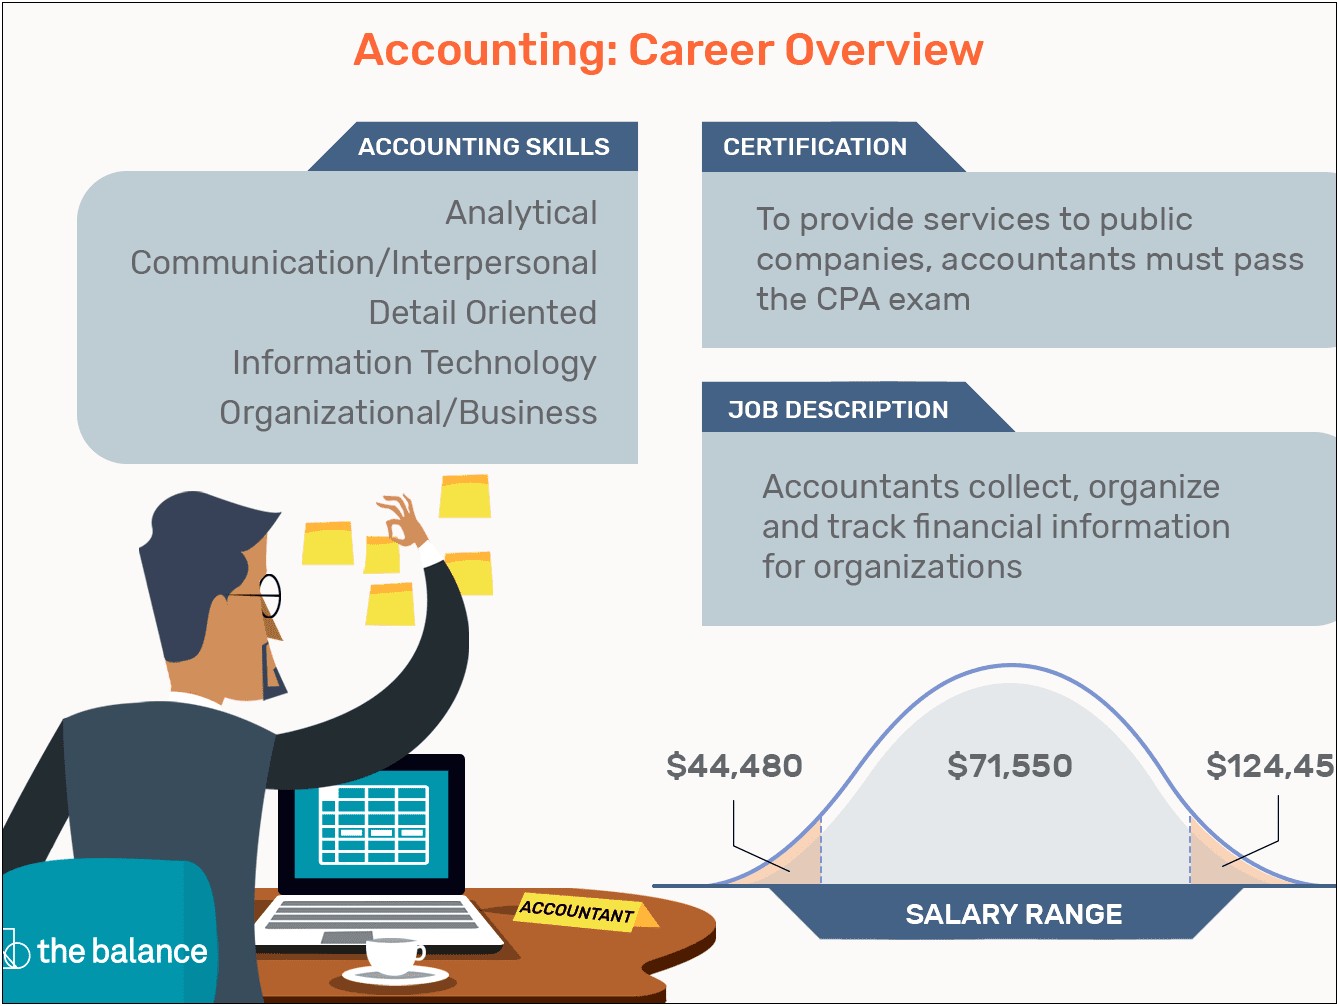 Accountant Skills And Abilities Resume